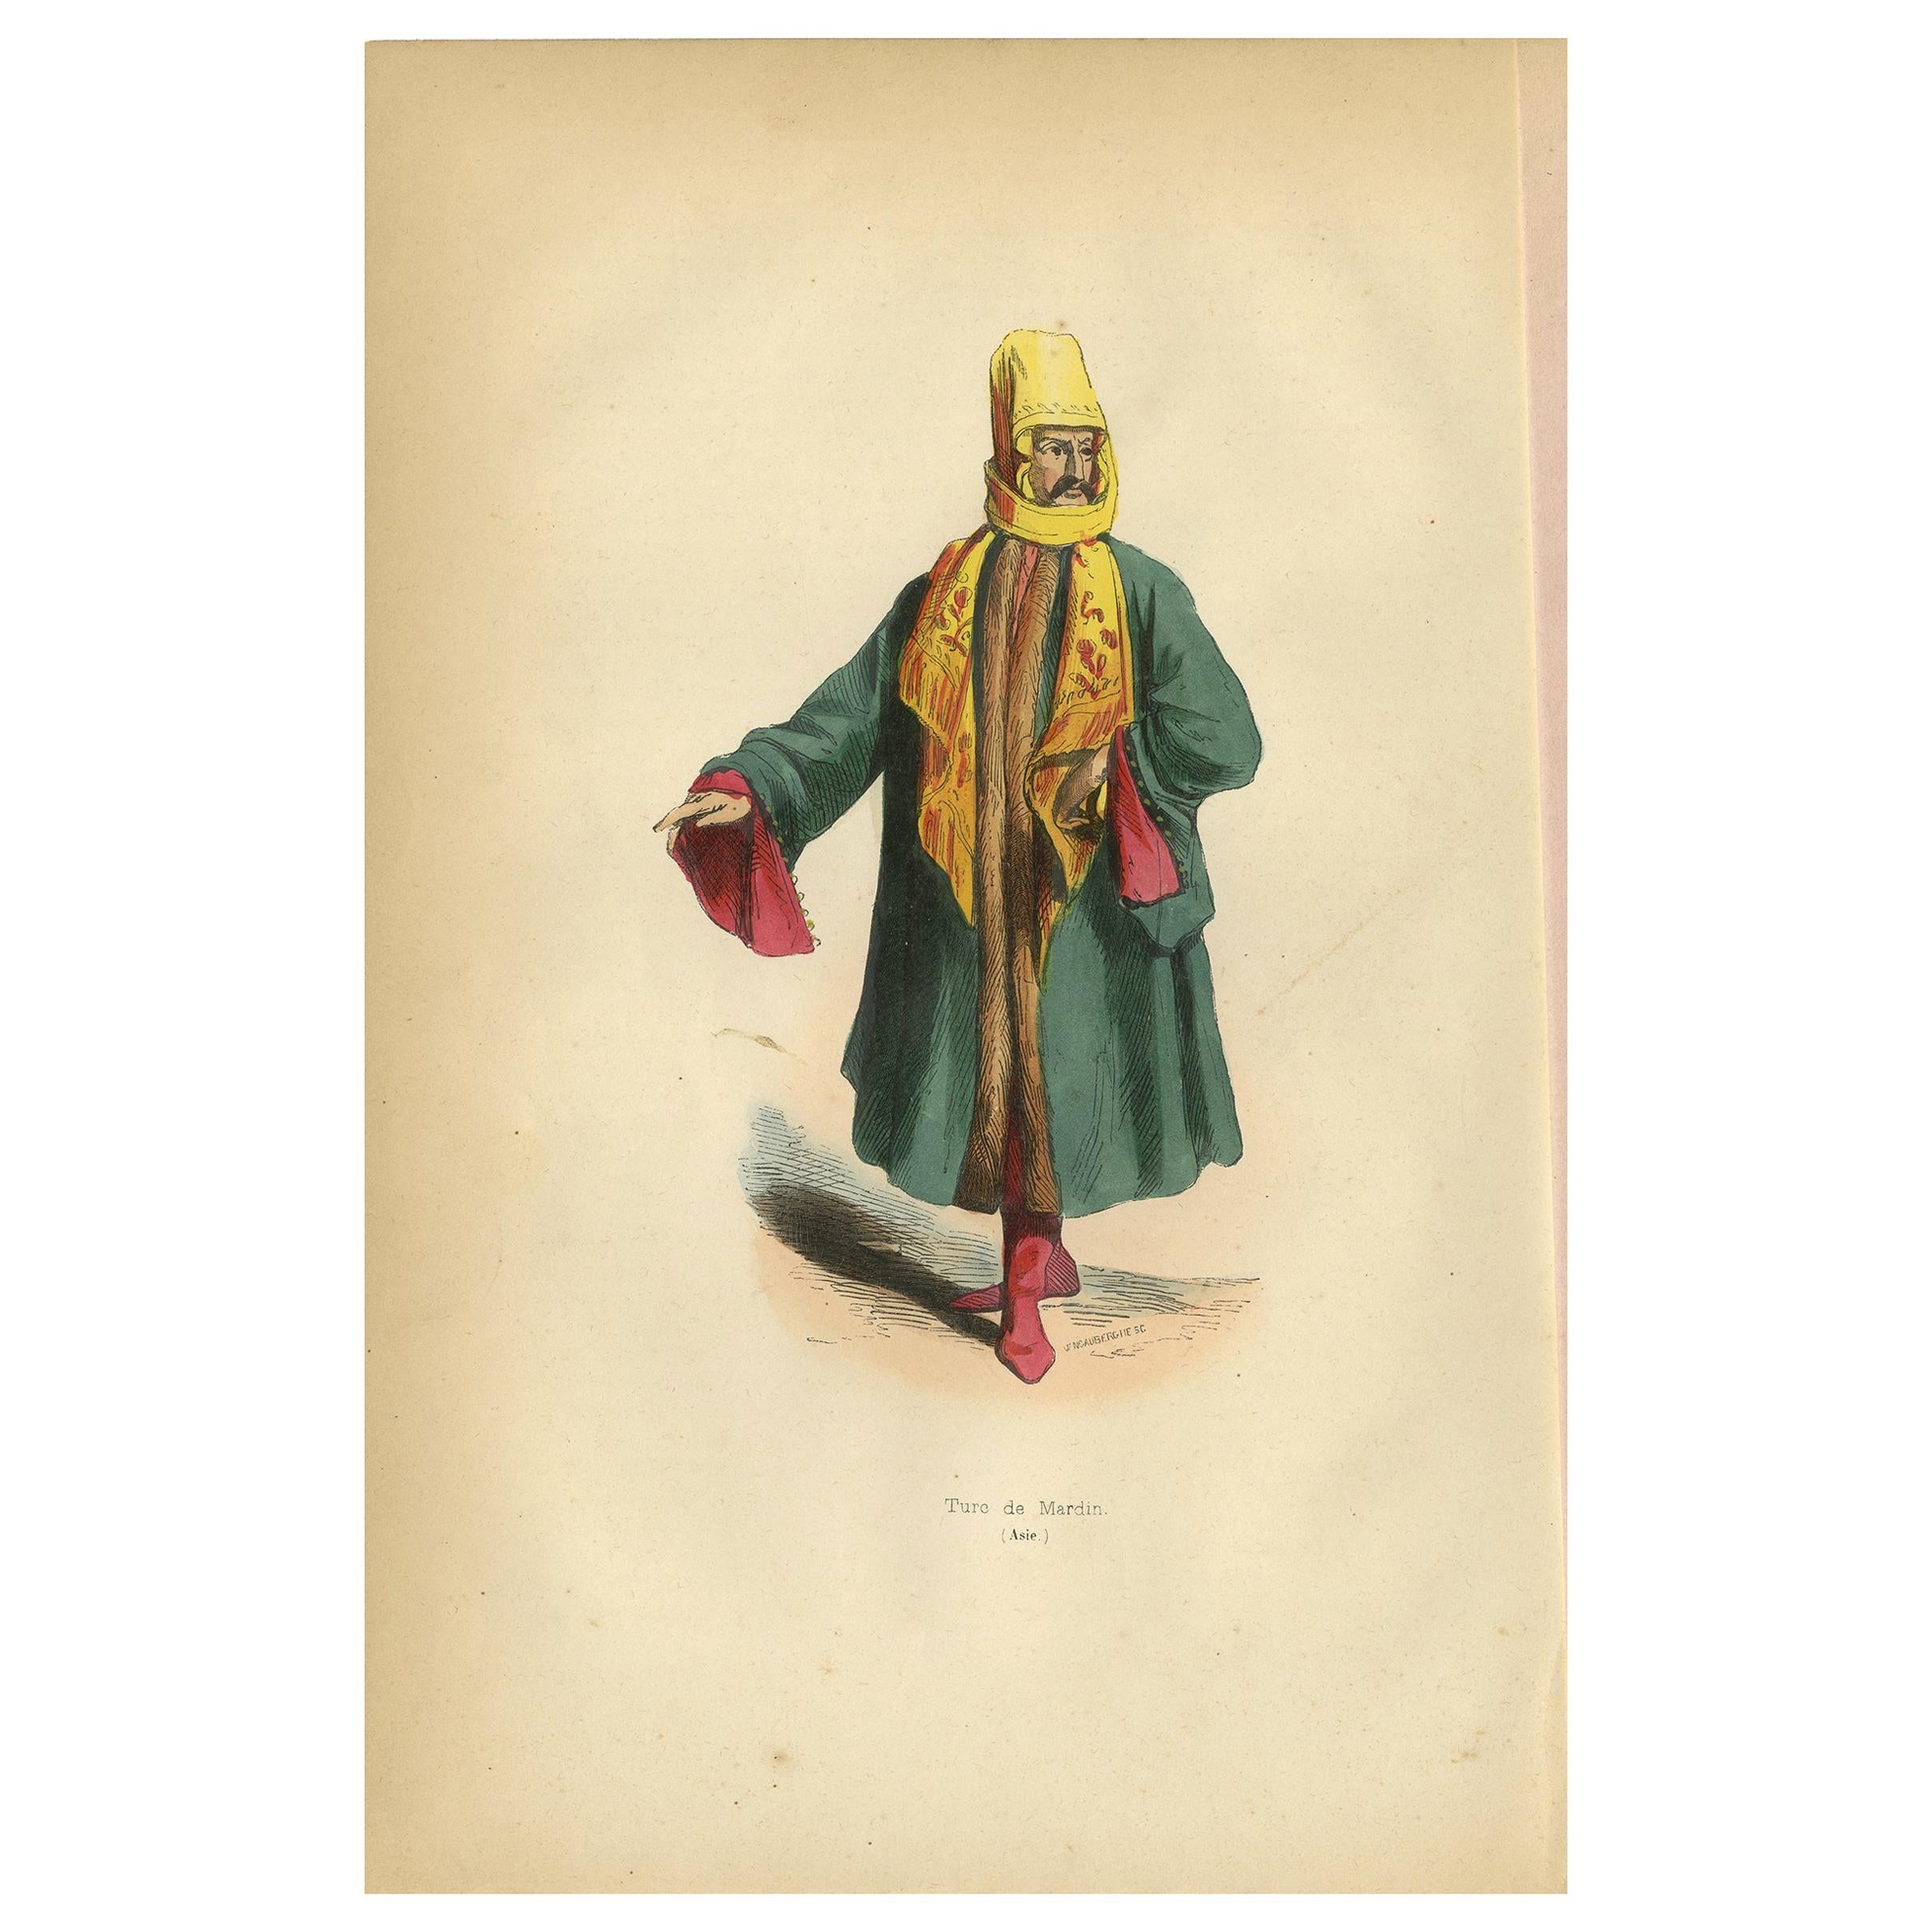 Antique Print of a Turk from Mardin by Wahlen, 1843